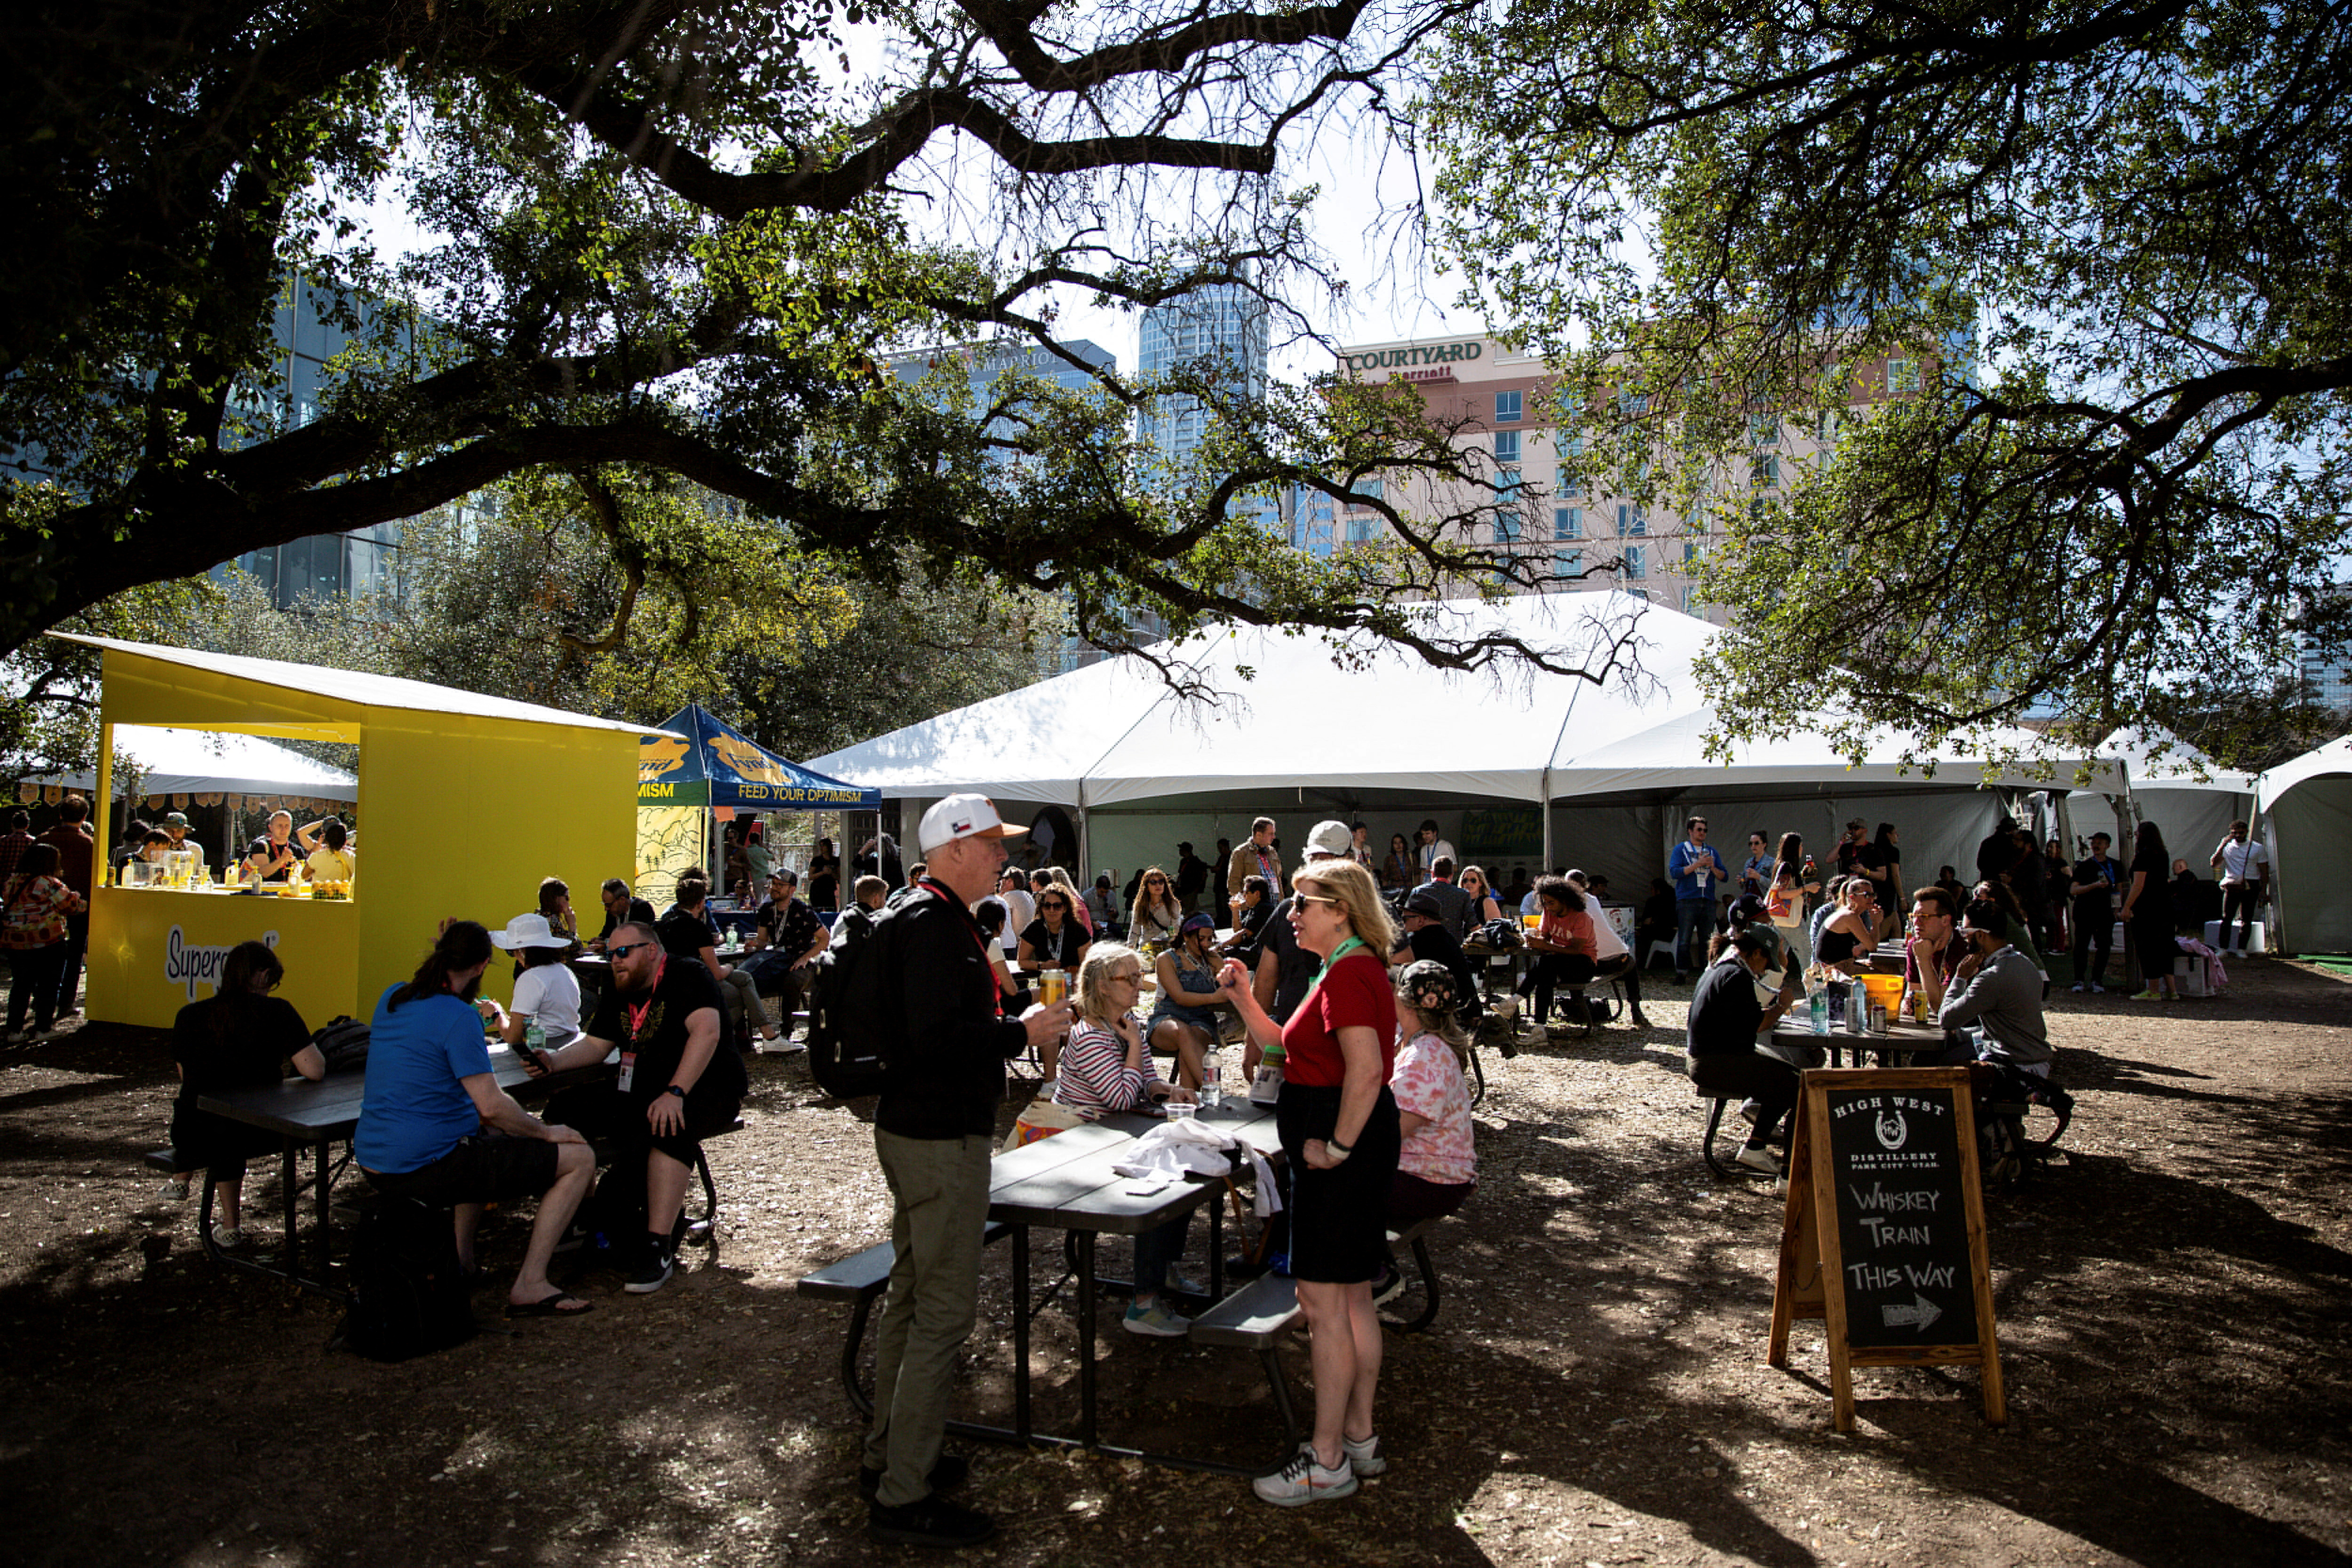 SXSW (South by Southwest) conference and festivals in Austin